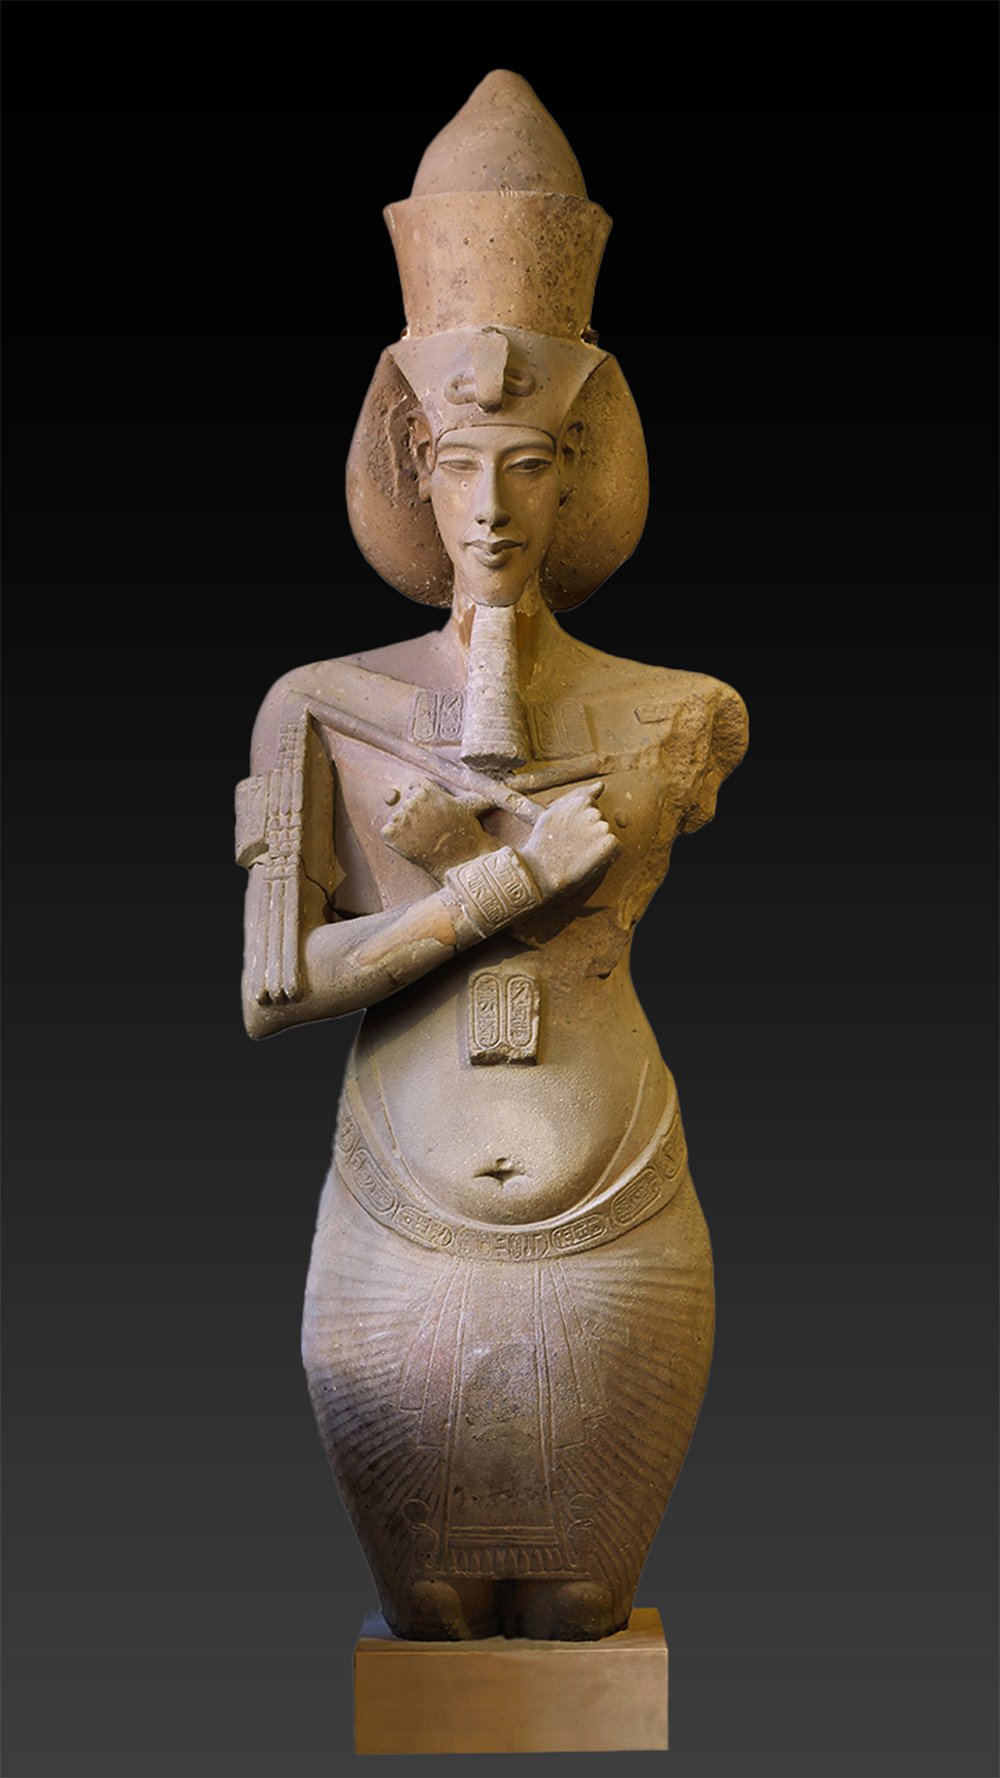 A stone statue of a standing figure of Amenhotep IV/Akhenaten. The statue is wearing a headdress and a skirt, and is on a square base. The background is black.